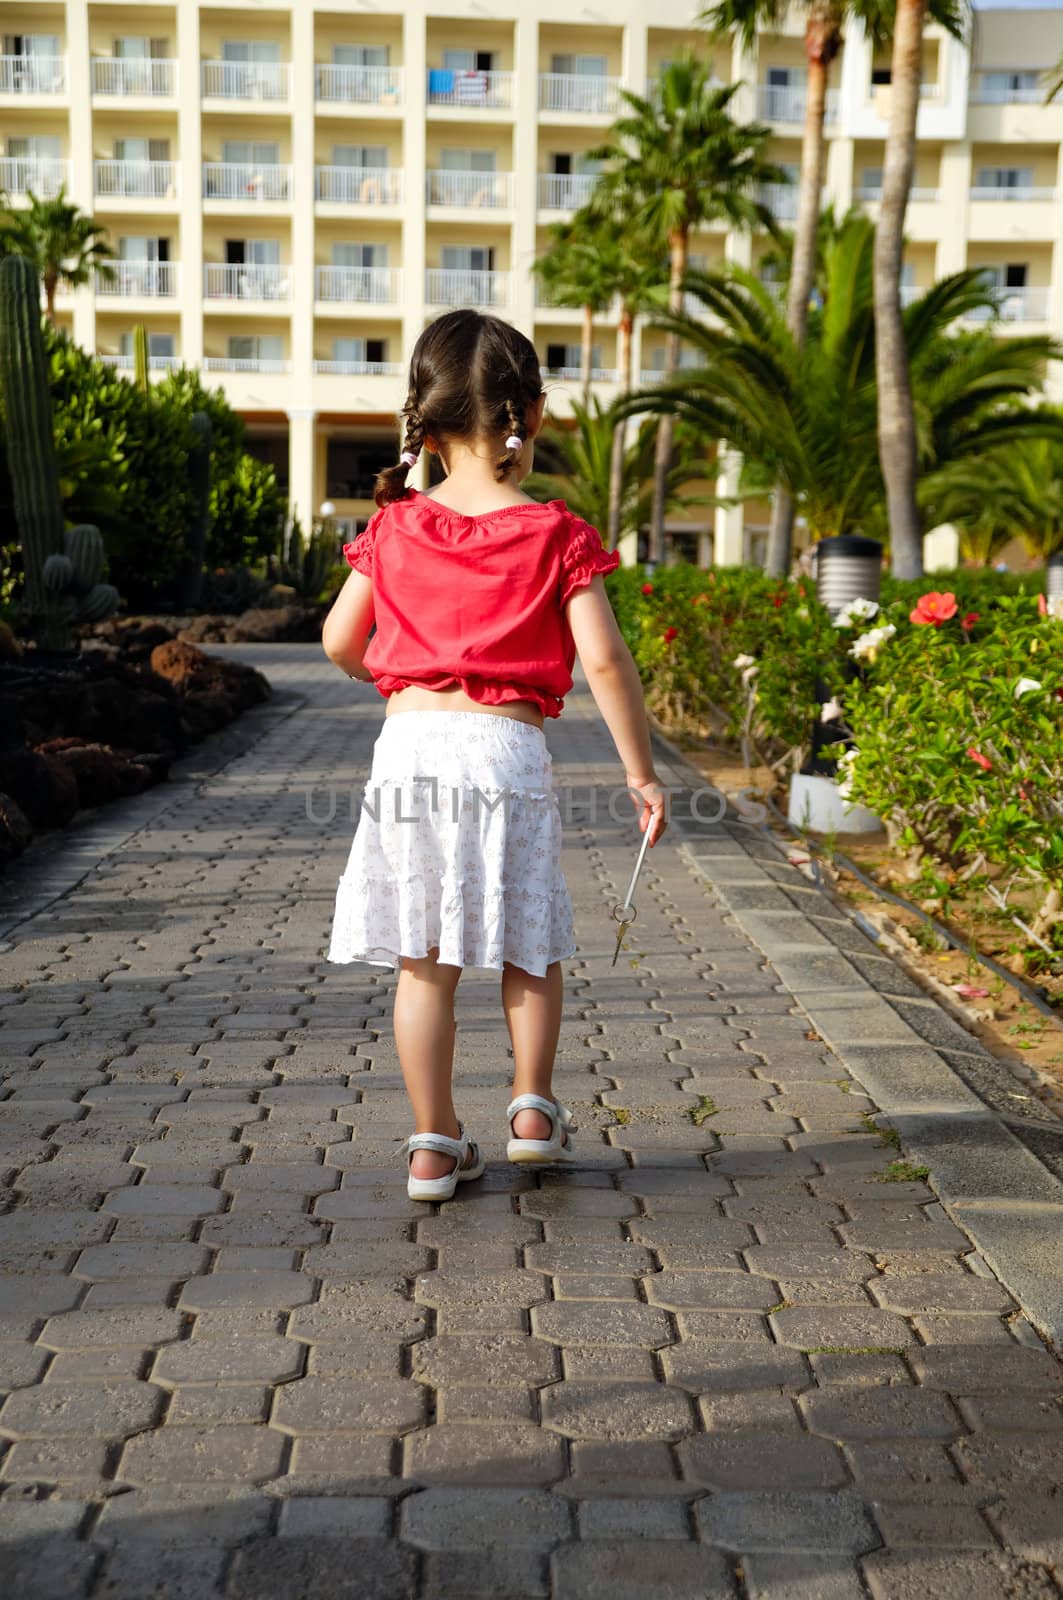 Young child walking with hotel key in her hann